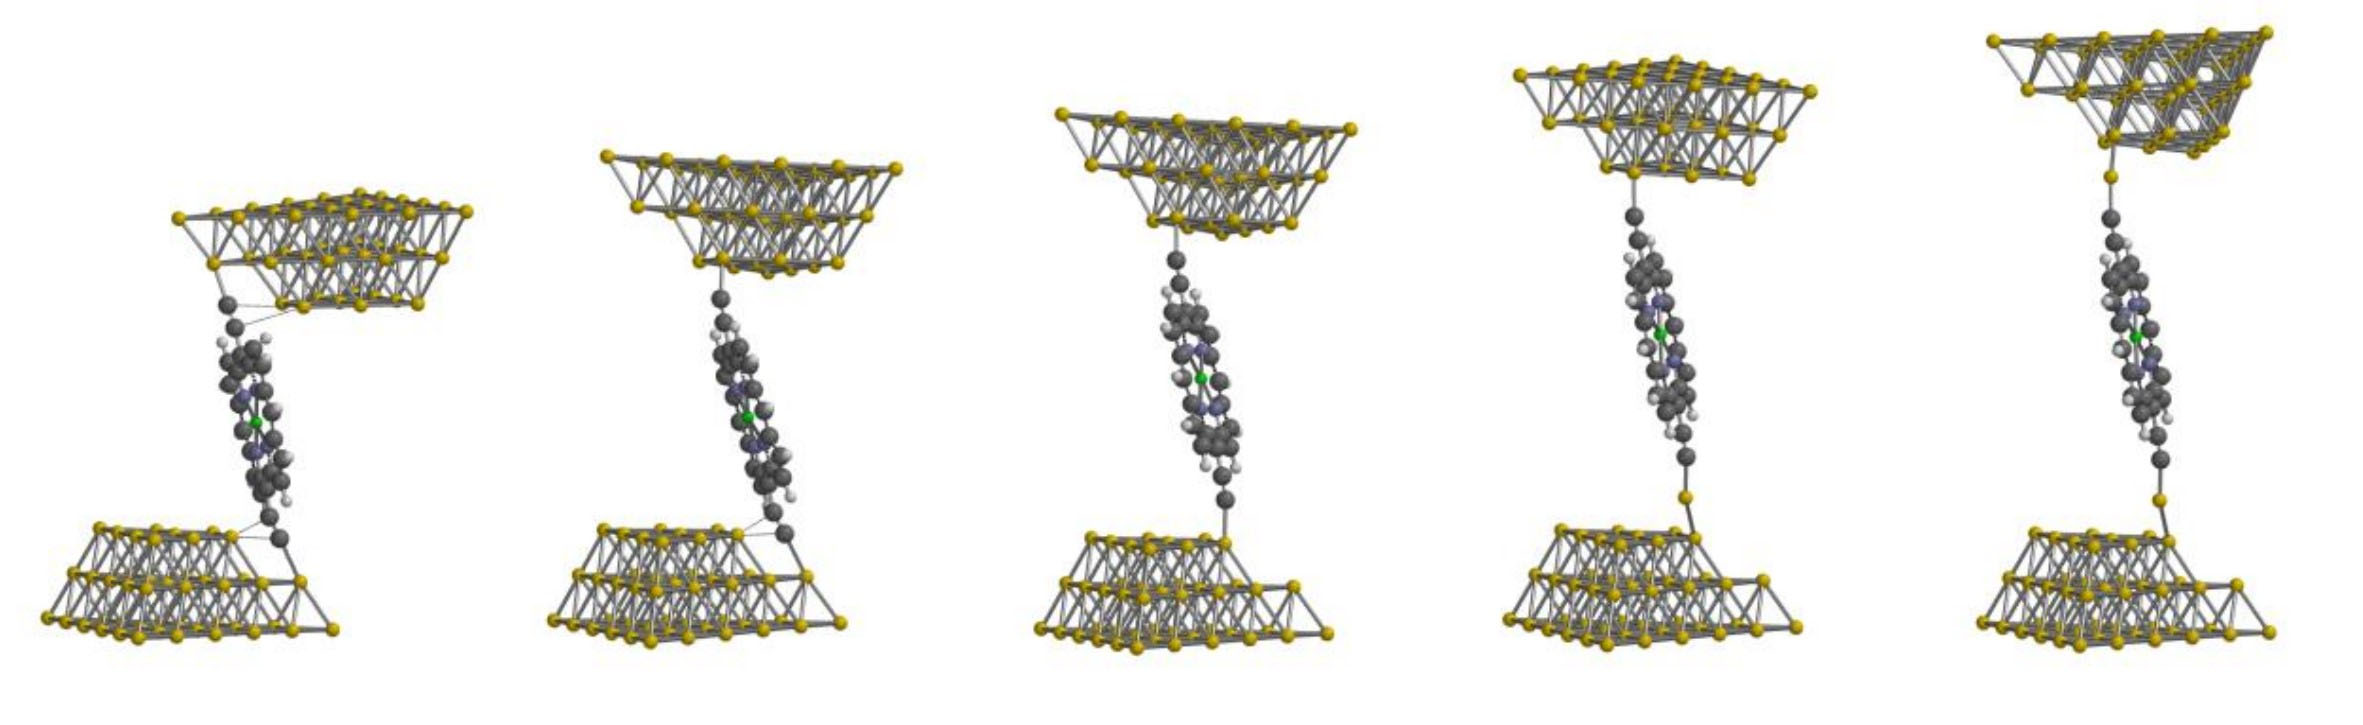 Schematic showing the molecular fishing procedure and the evolution of a single-molecule junction as the distance between the STM tip and surface electrodes is increased